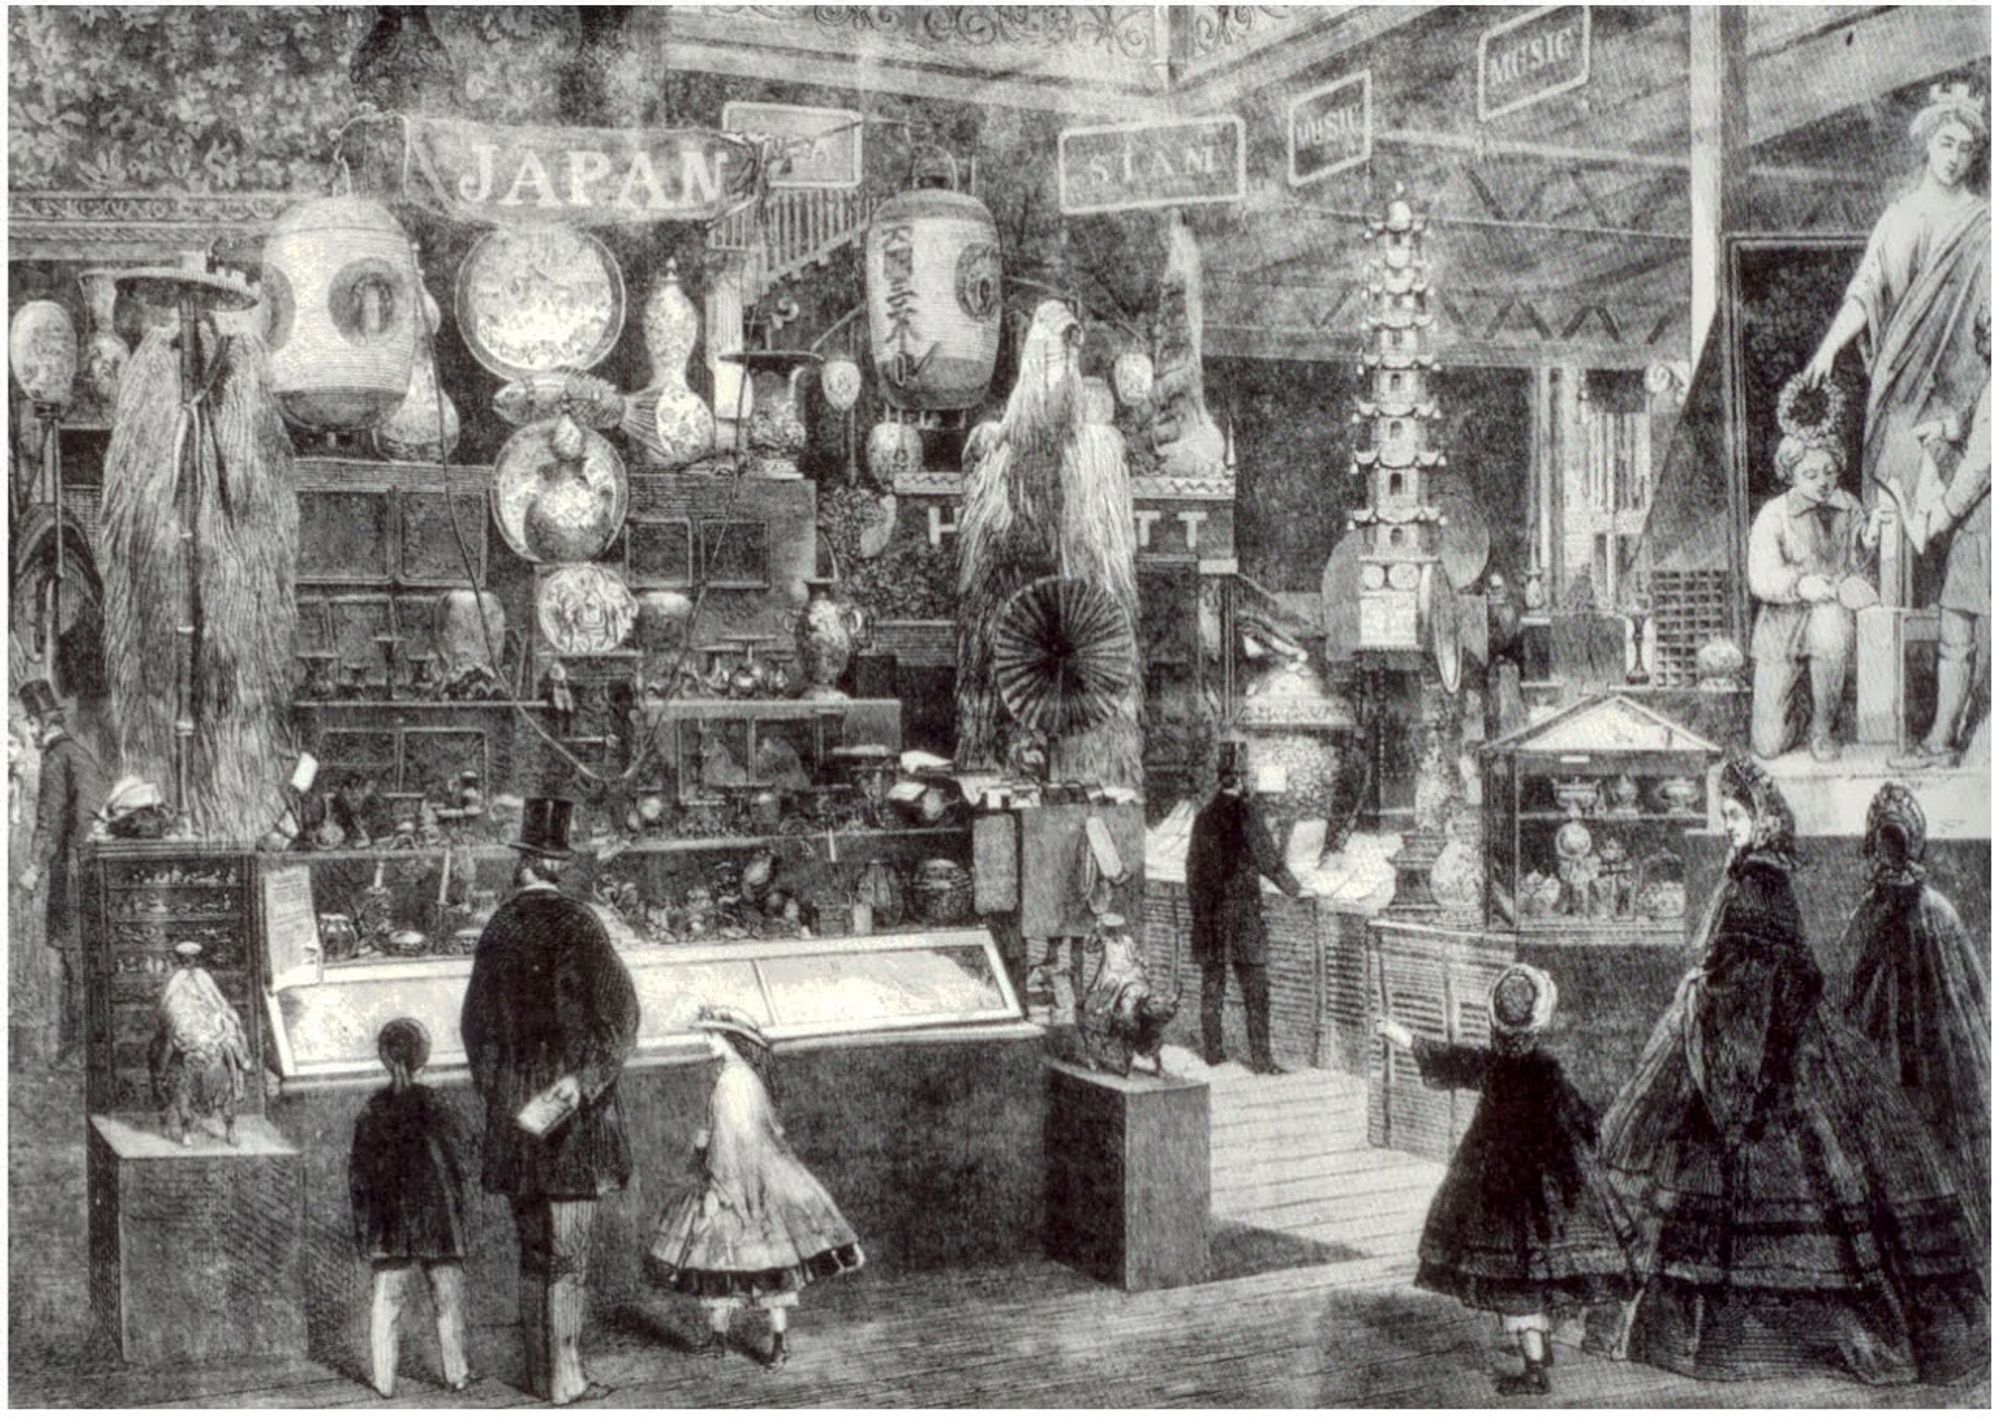 A Victorian family ogles exotic, Eastern goods at the world fair in London.